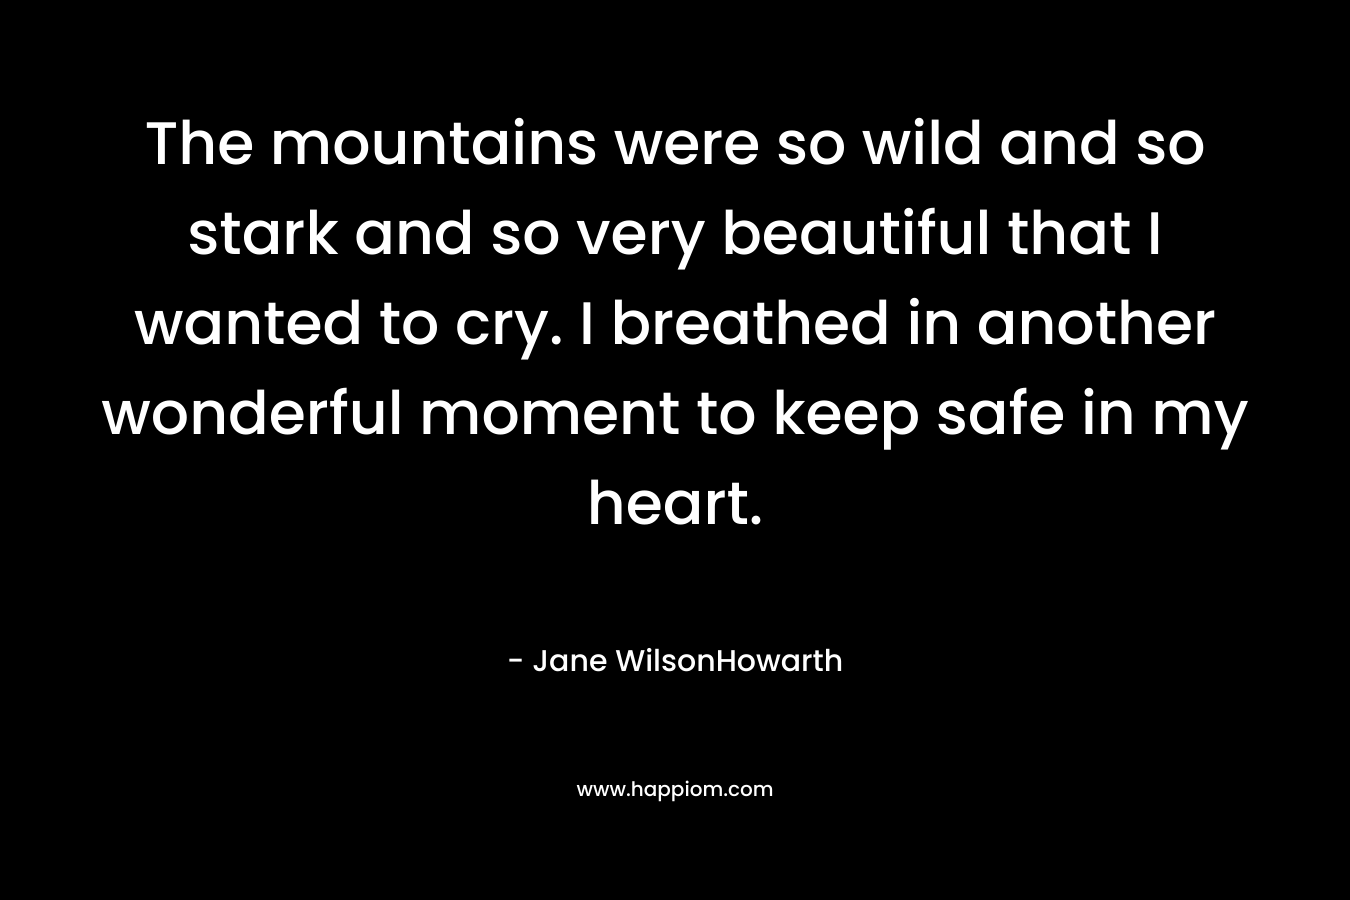 The mountains were so wild and so stark and so very beautiful that I wanted to cry. I breathed in another wonderful moment to keep safe in my heart.